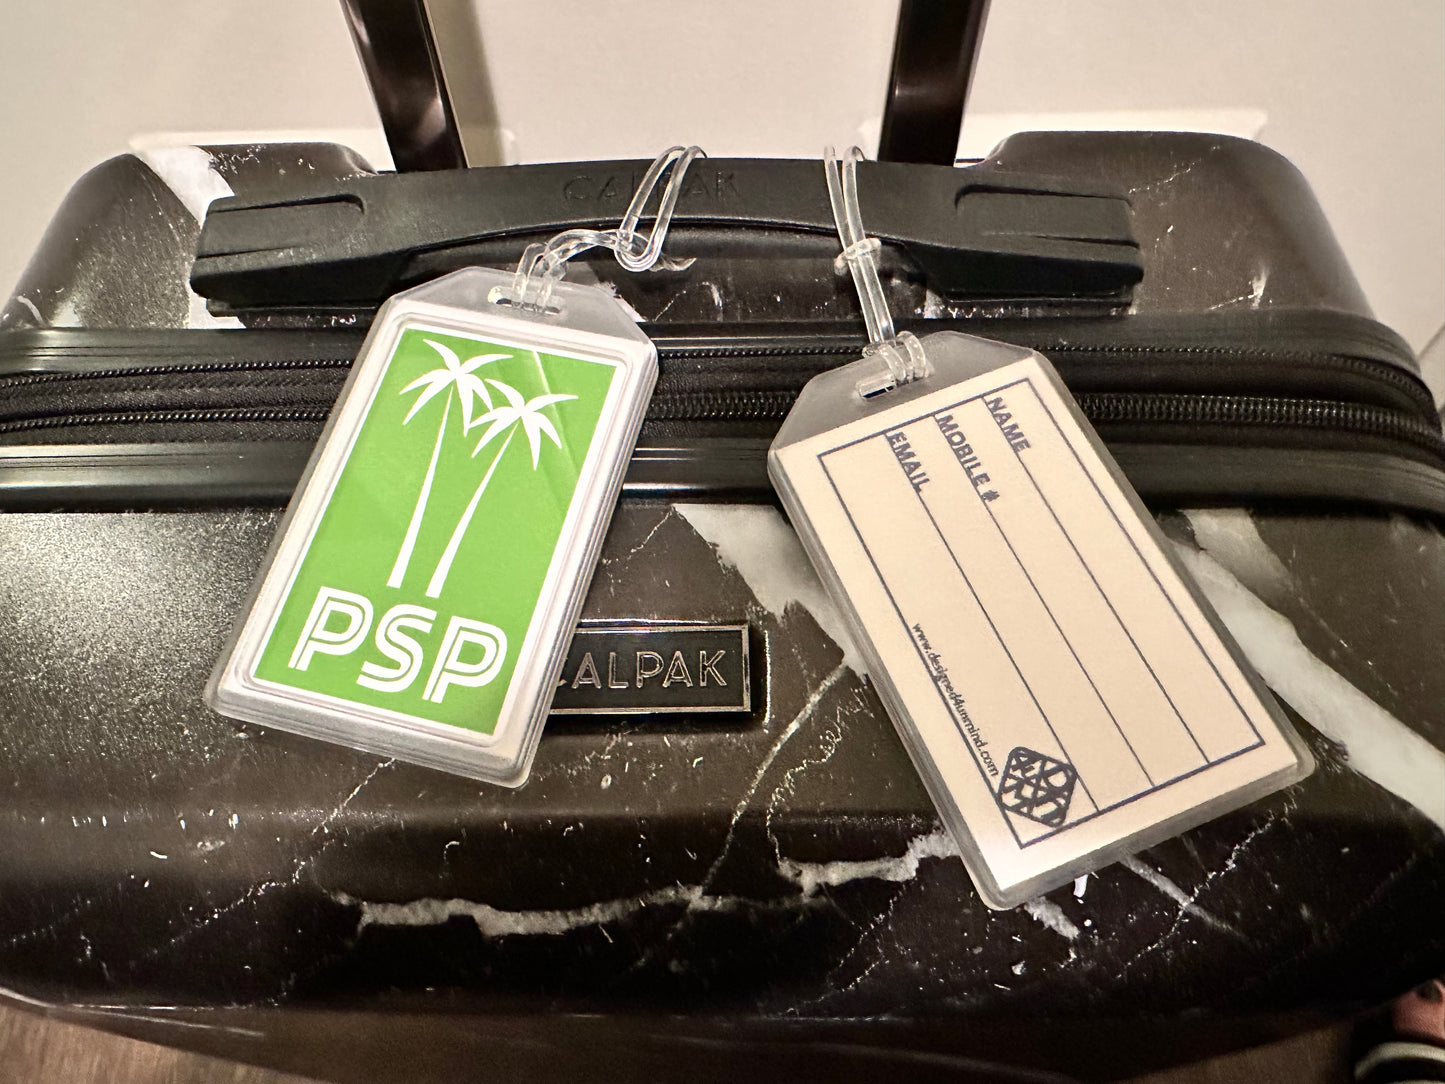 CALIFORNIA CITIES  Luggage & Travel Bag Tags PALM SPRINGS/PSP